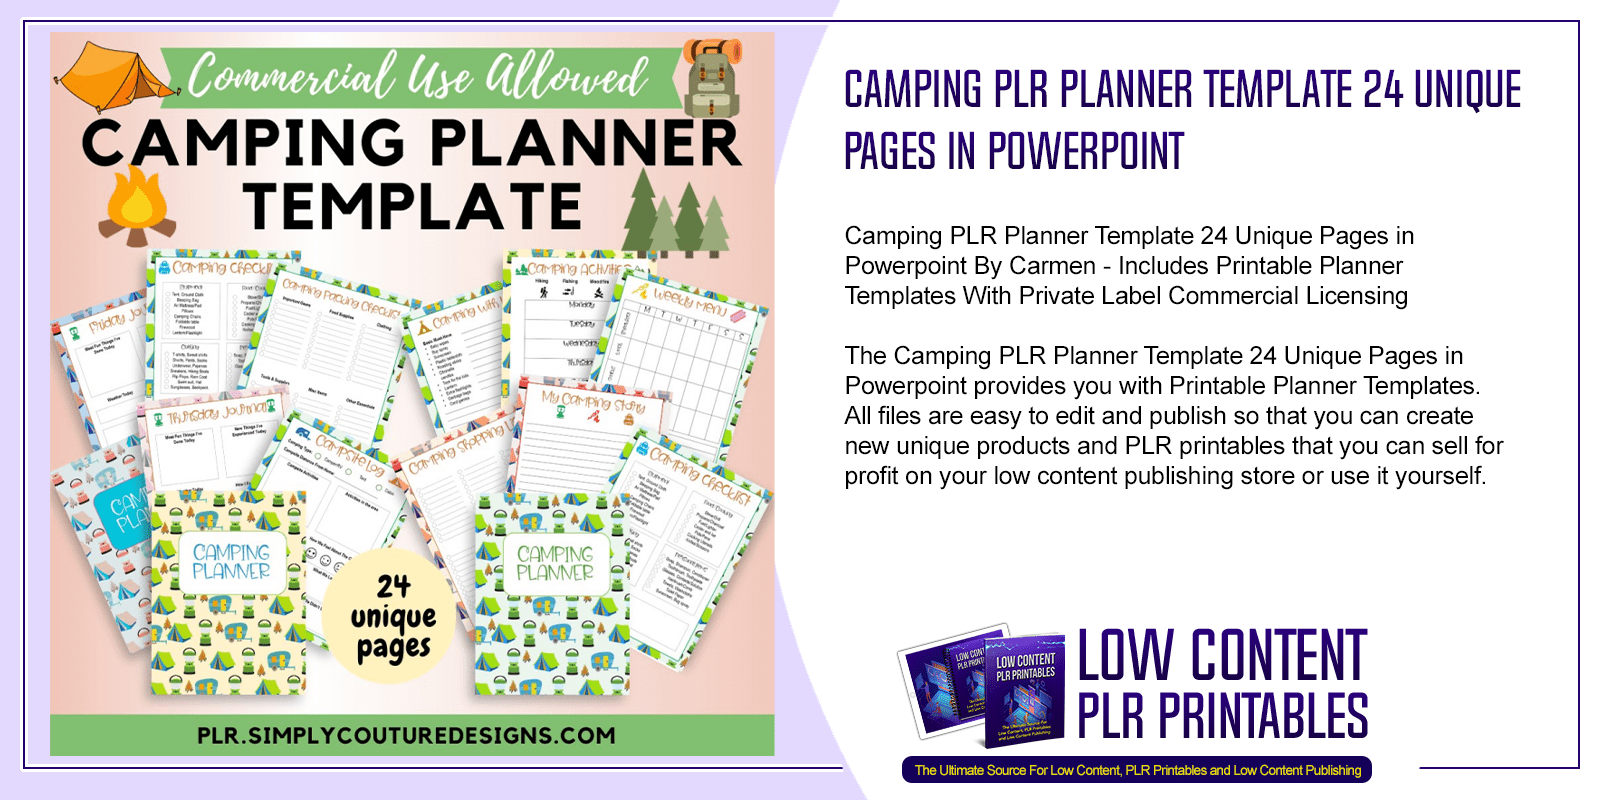 Camping PLR Planner Template 24 Unique Pages in Powerpoint